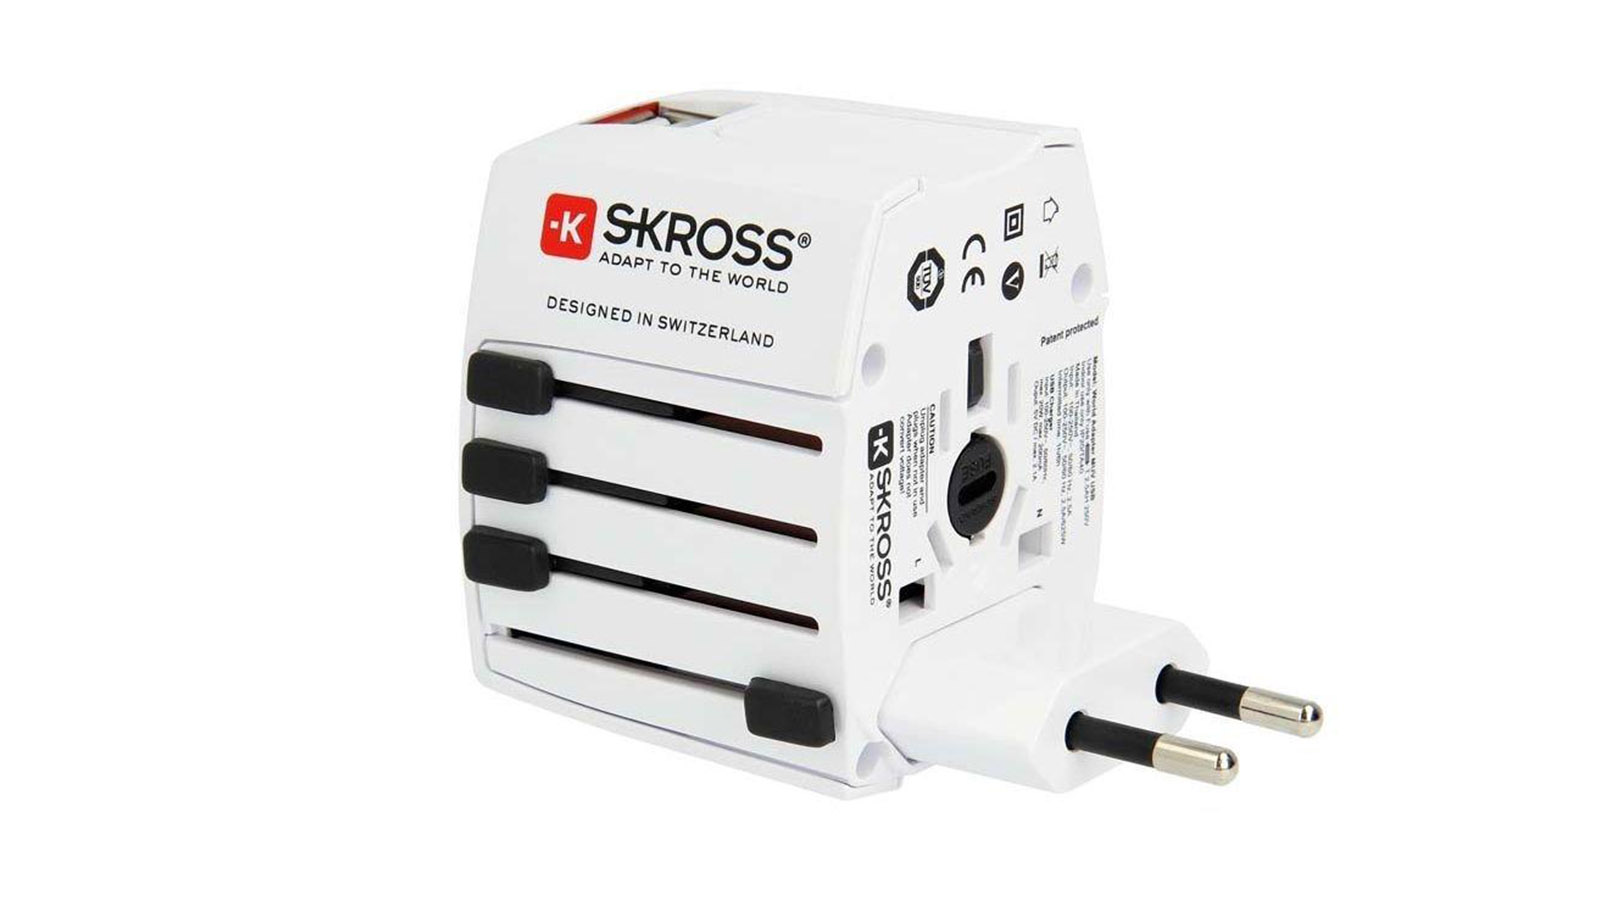 Skross World Travel Adapter MUV USB - Best for two-pin compatibility